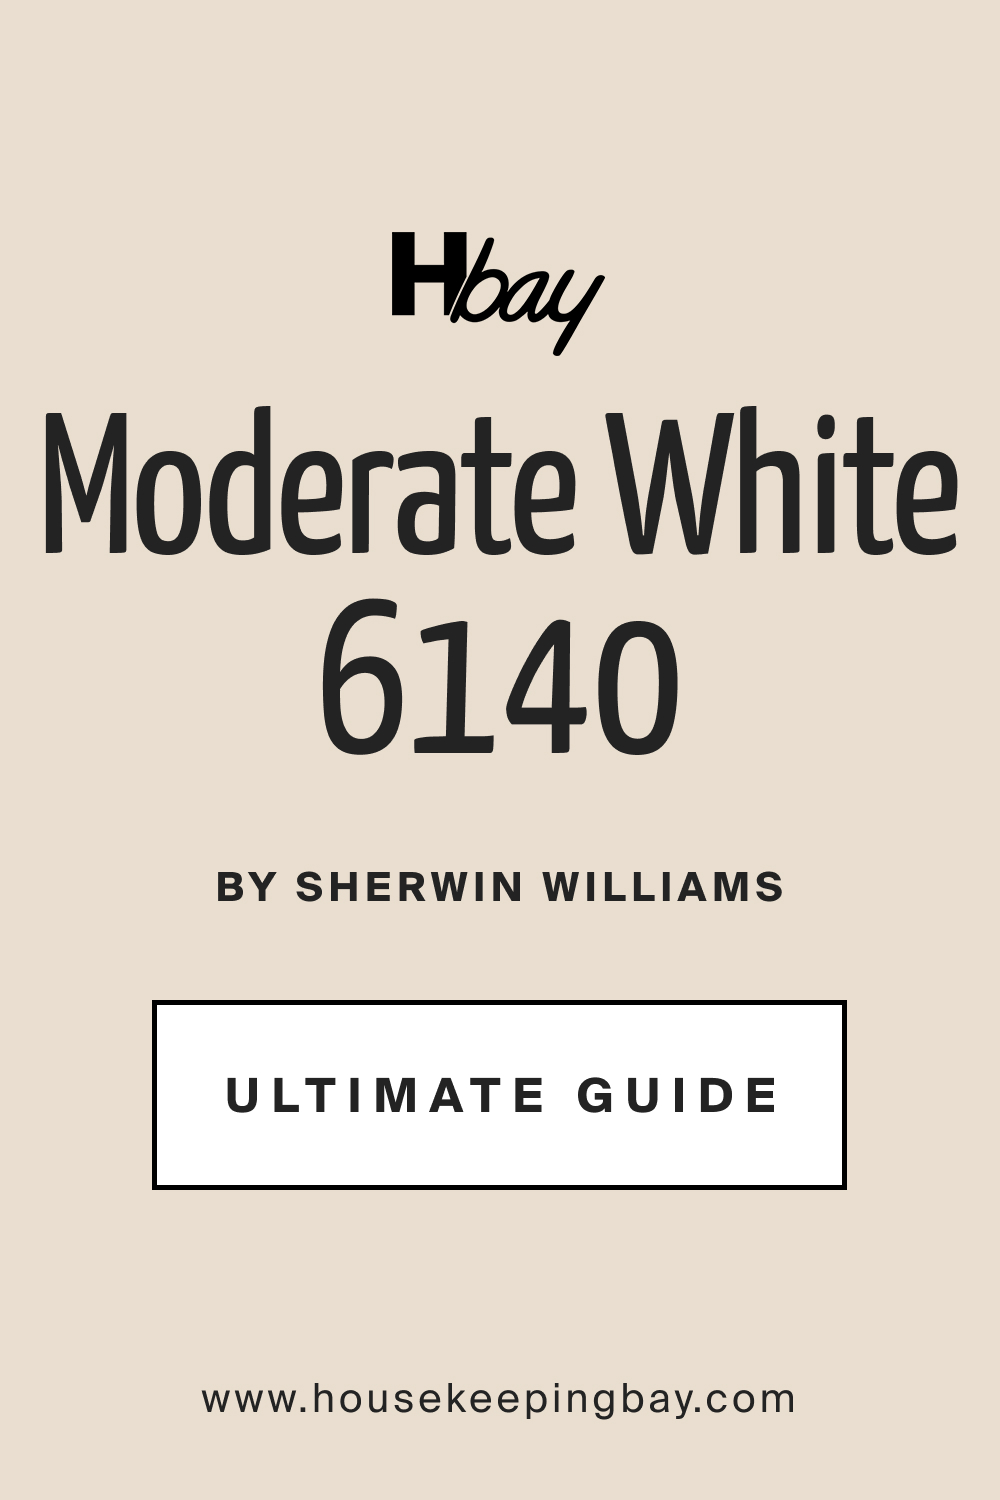 SW 6140 Moderate White by Sherwin Williams Ultimate Guide